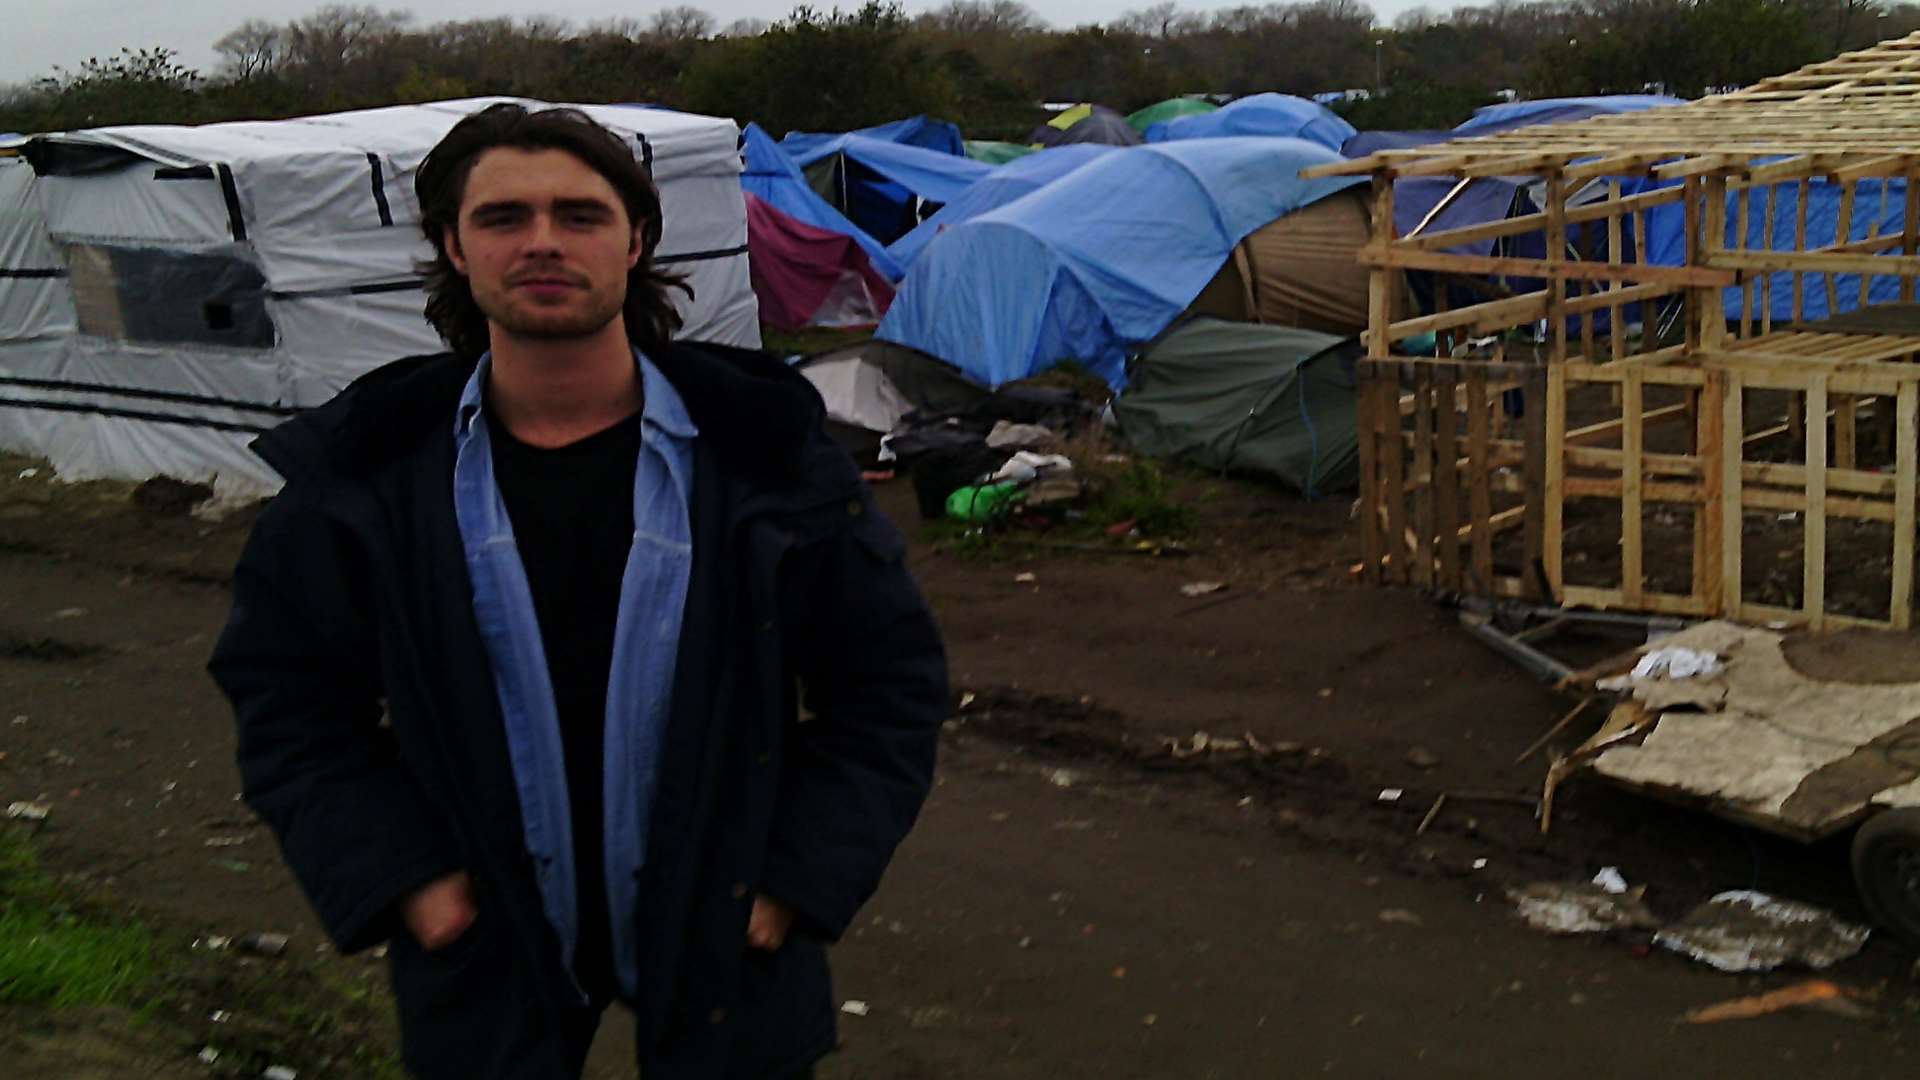 Jay Burgess at The Jungle migrants camp in Calais where he is helping out